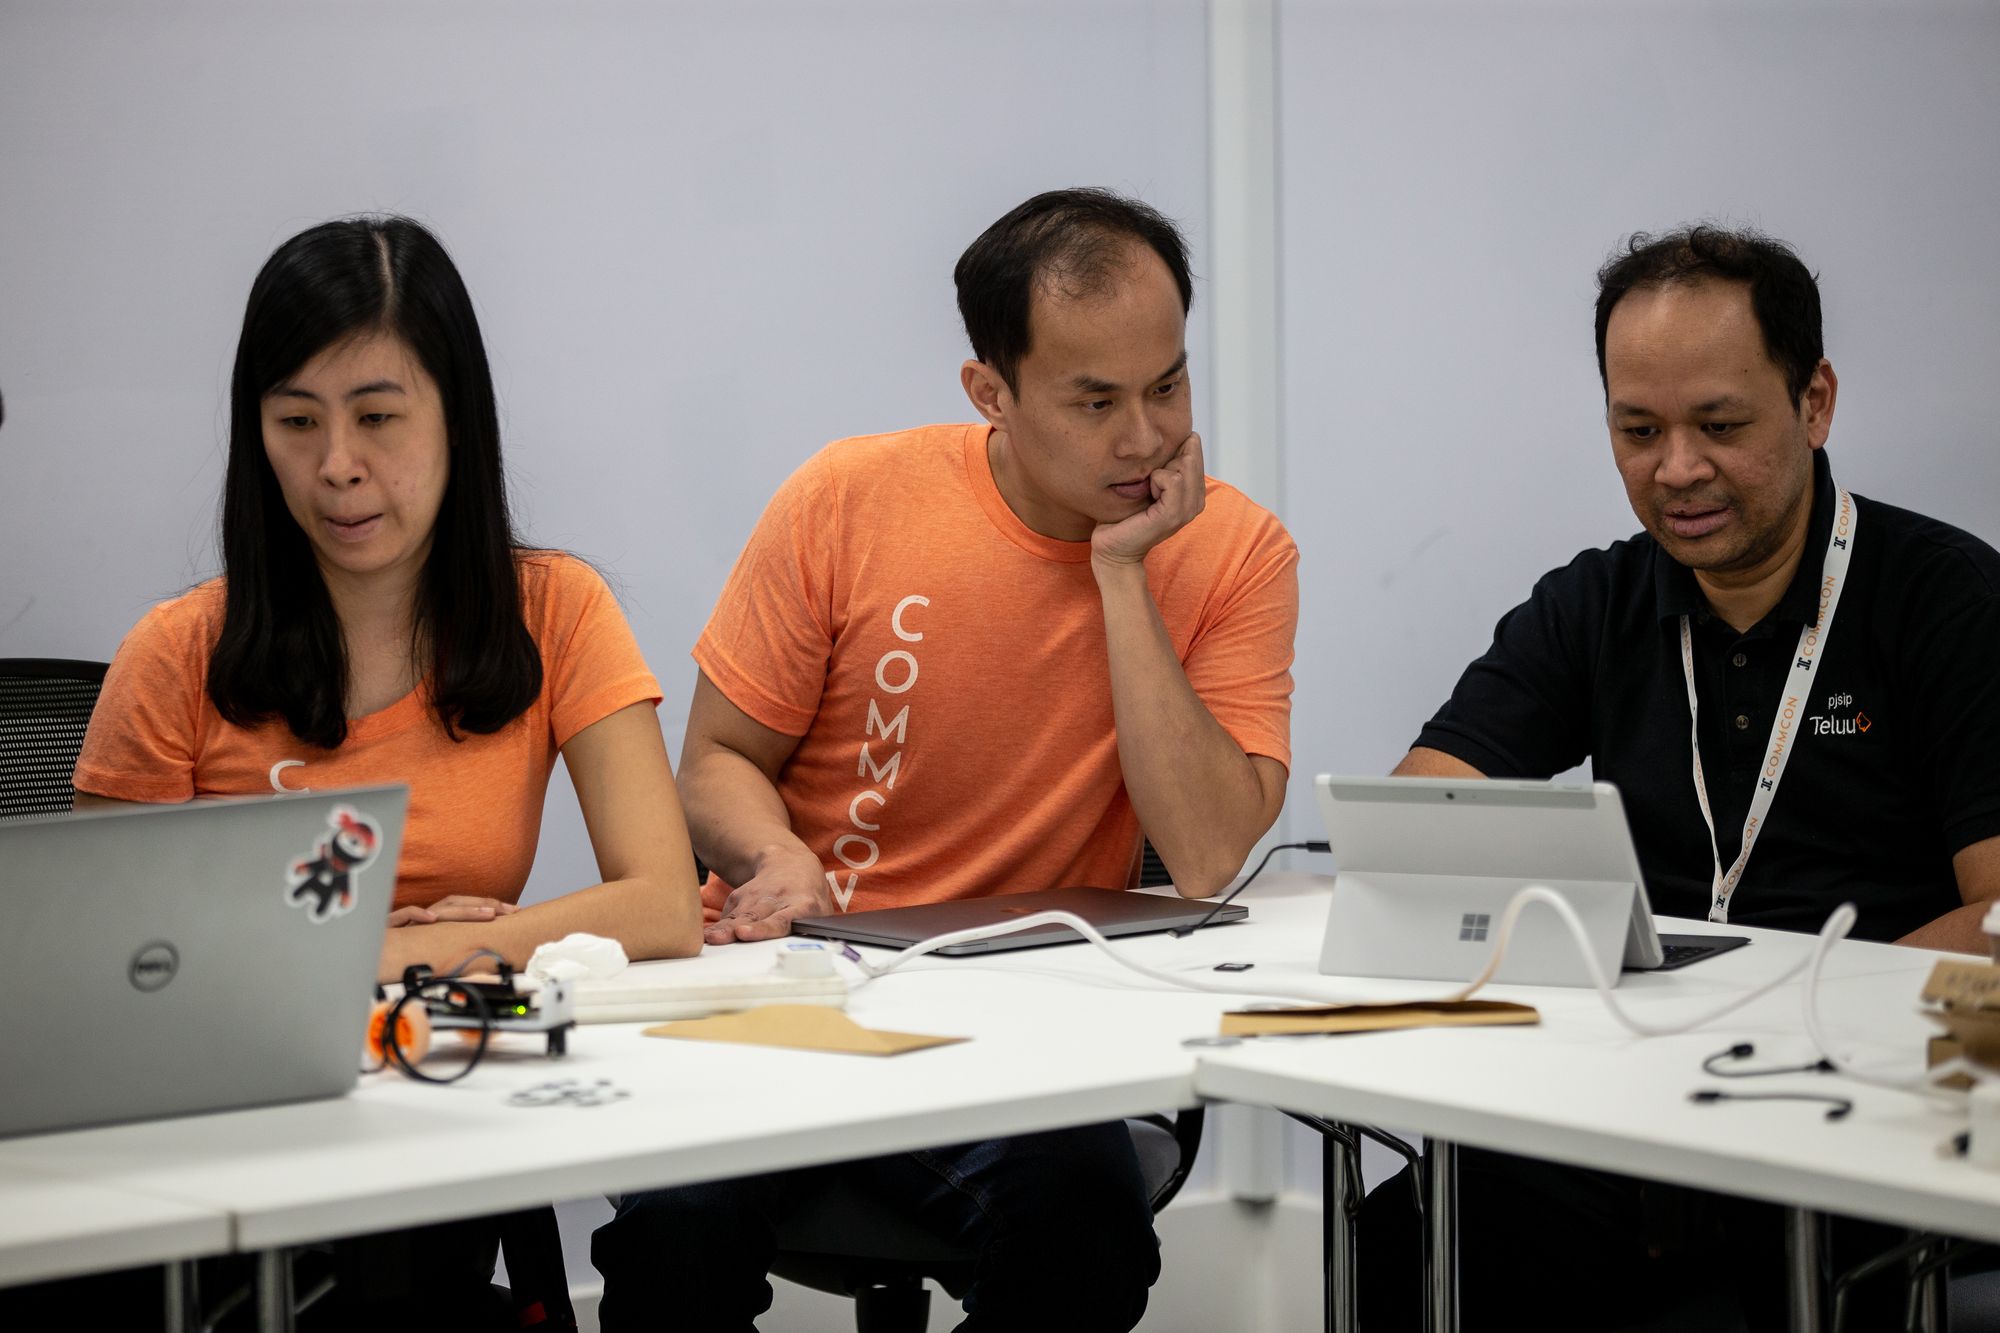 Three people sit at laptops and tablets with some electrical equipment, working together to build a toy car with a working video connection